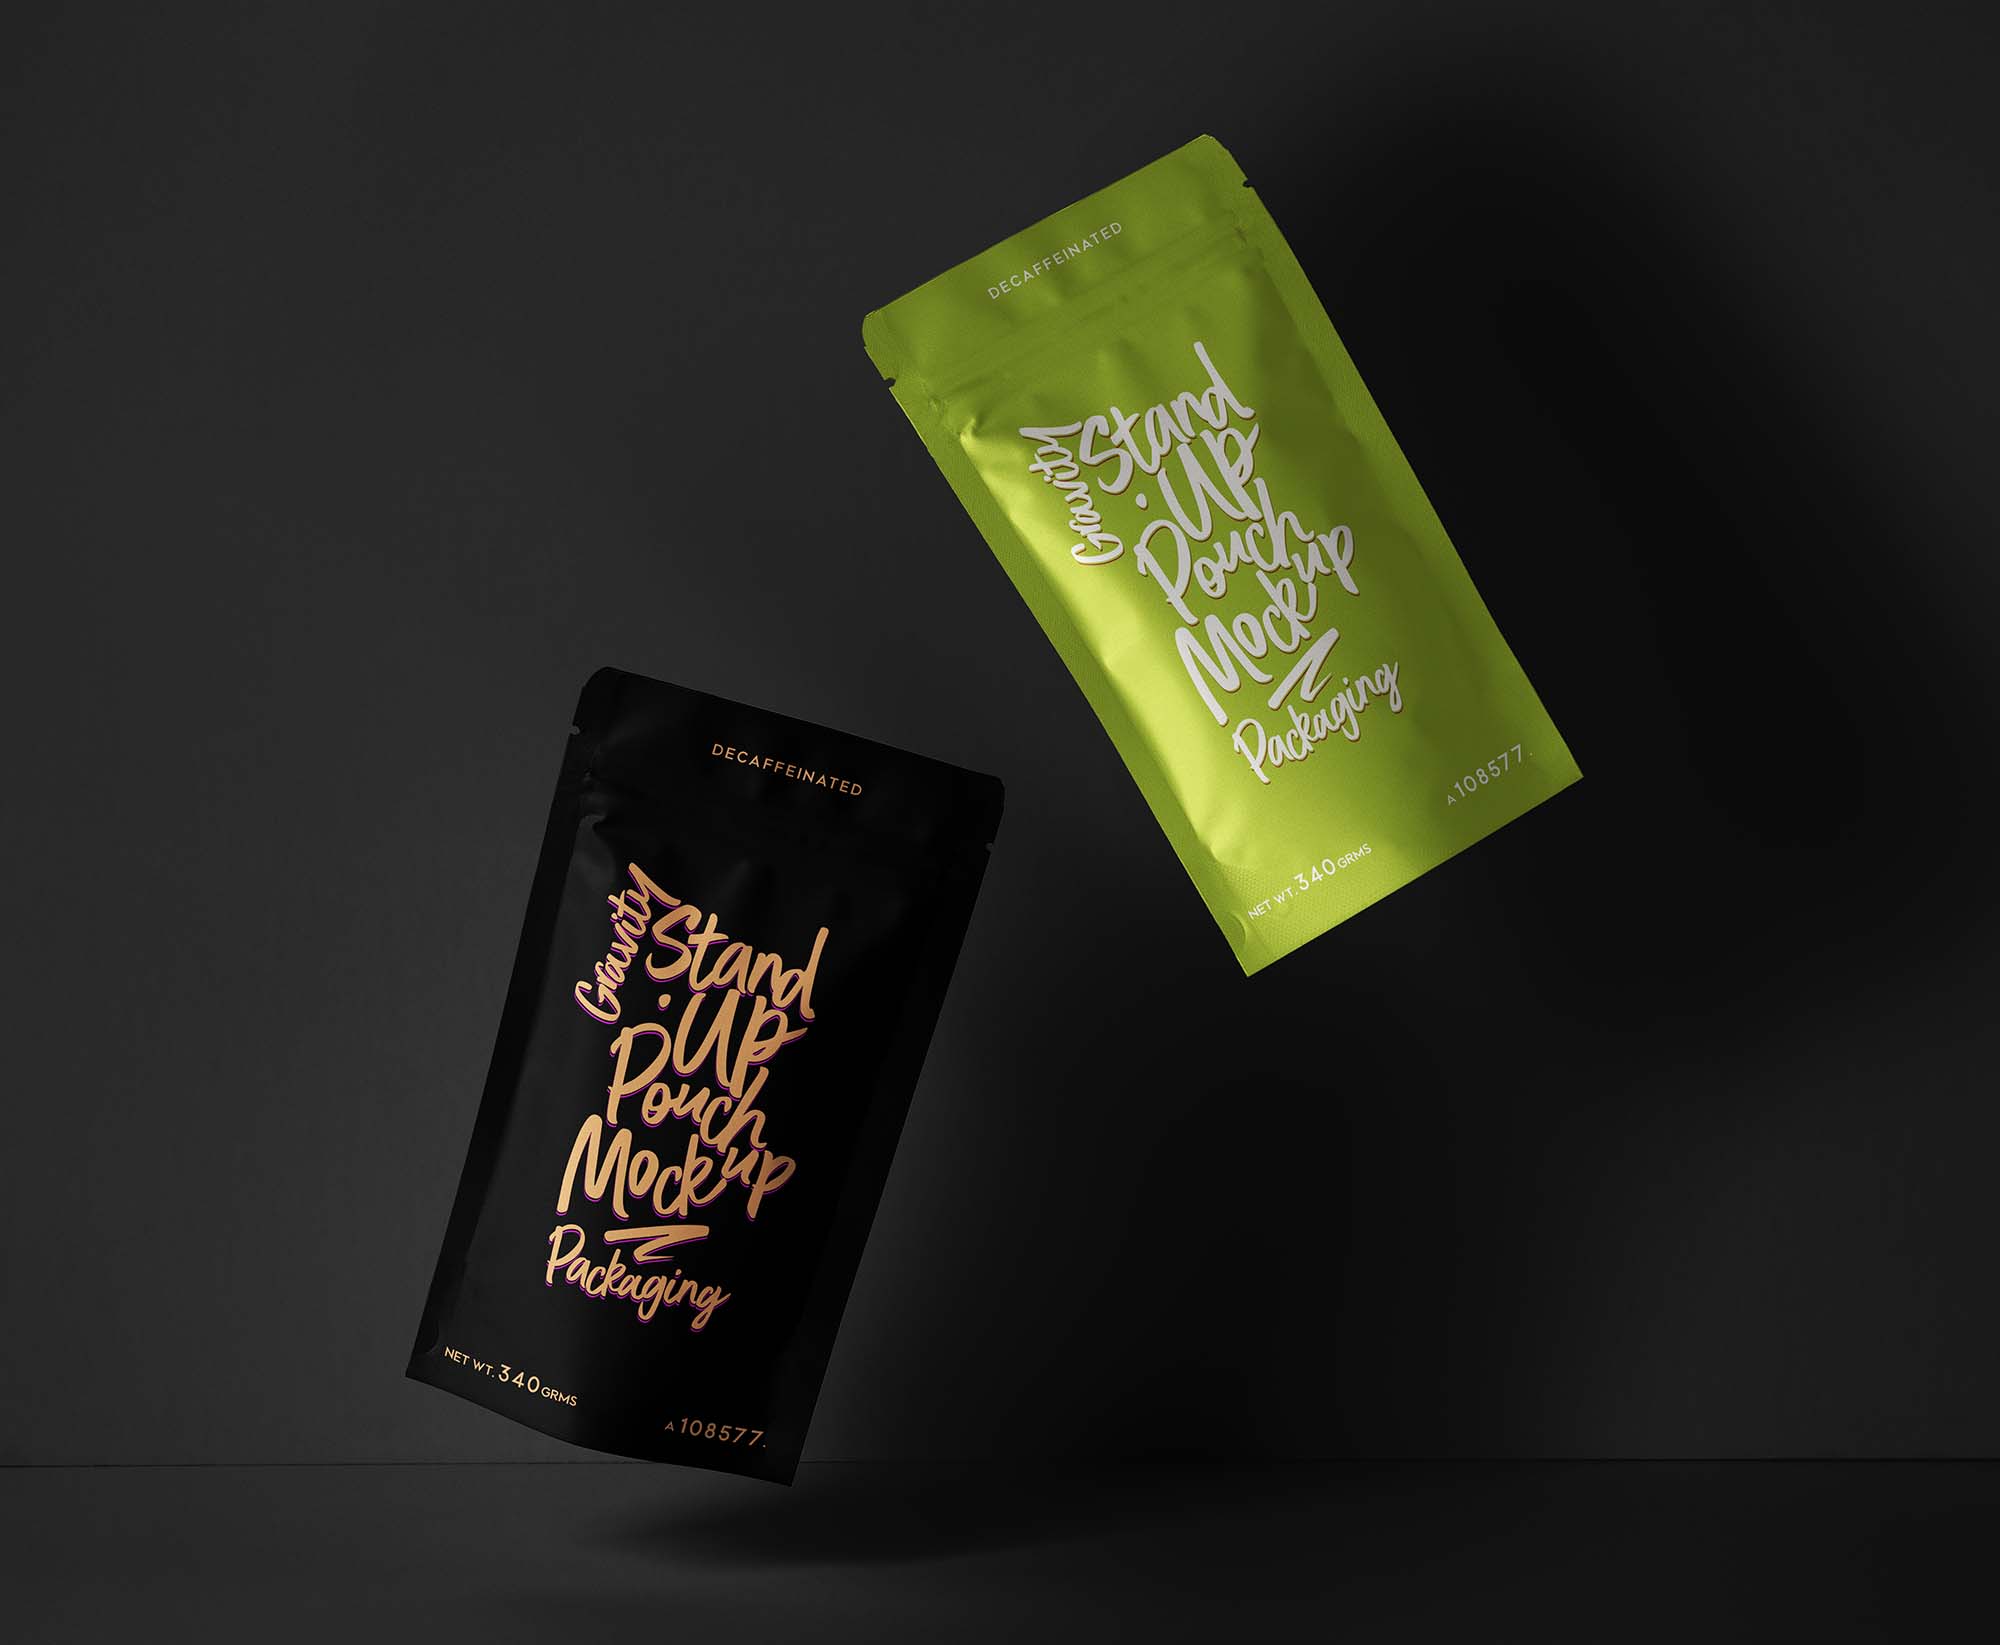 Download Stand-Up Pouch Packaging PSD Mockup (Free) by Pixeden